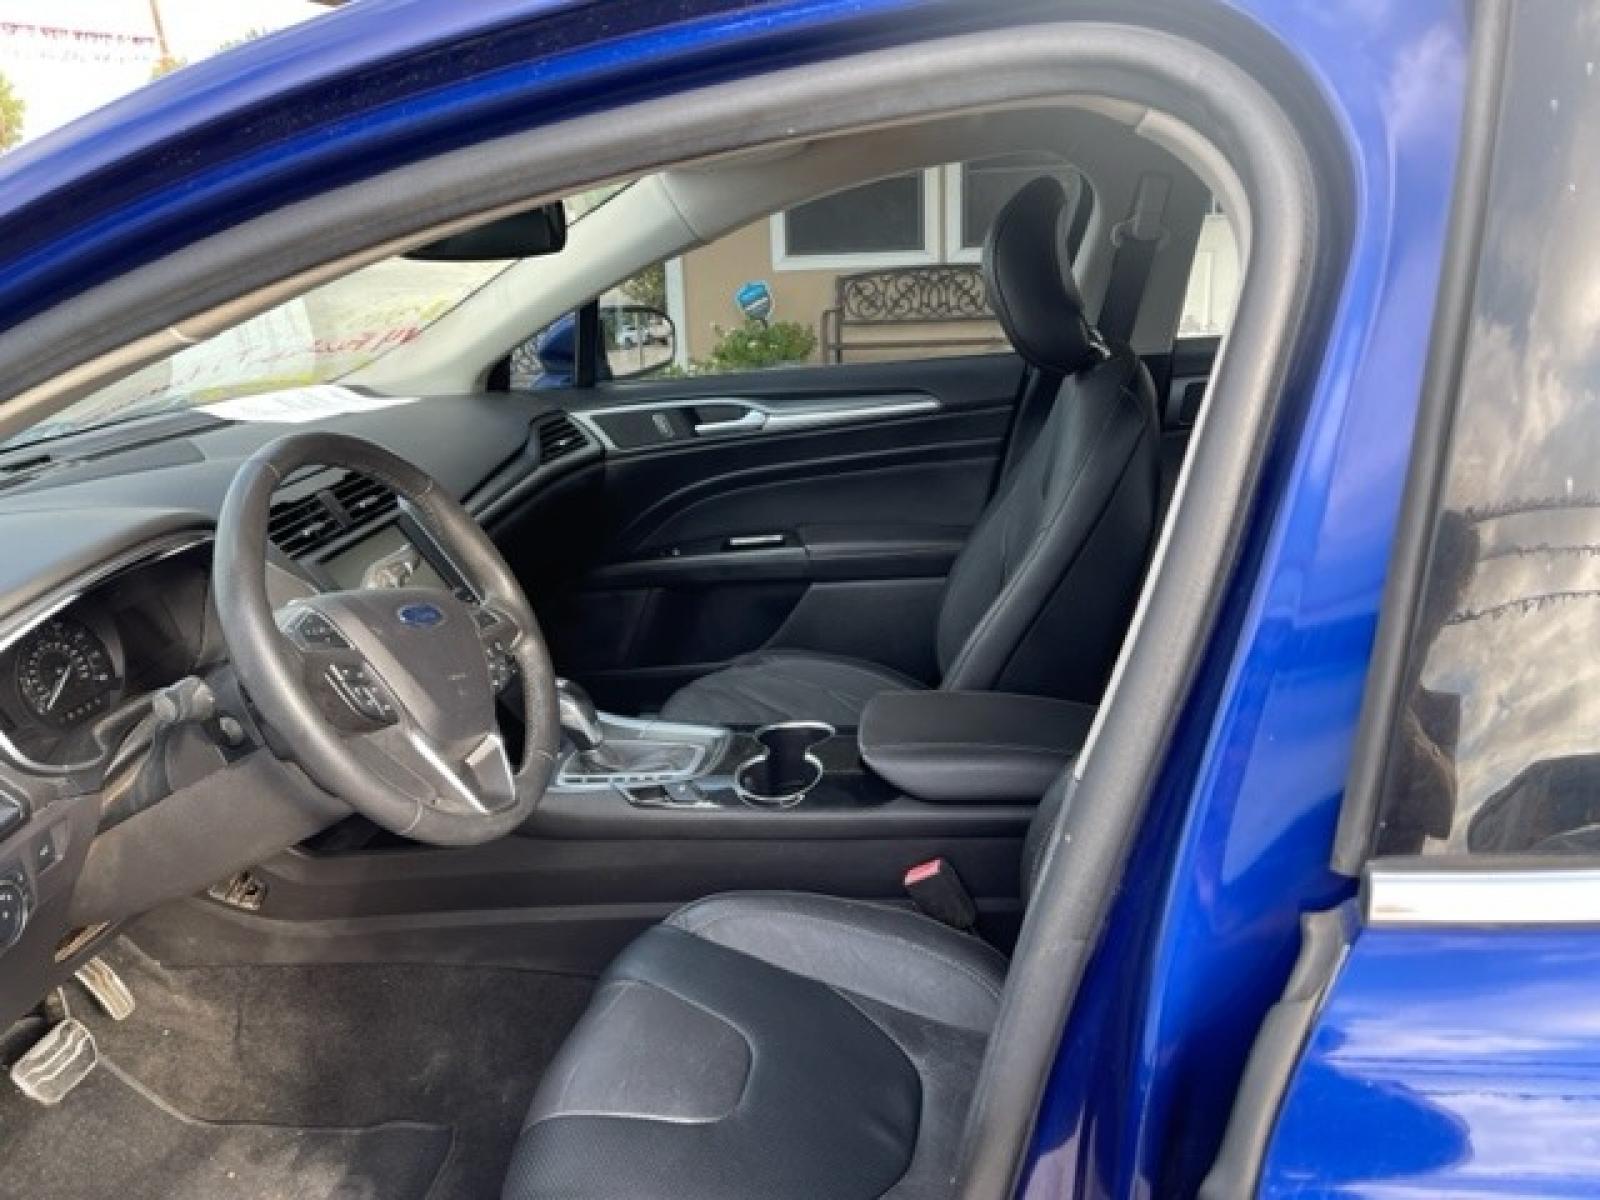 2014 BLUE FORD FUSION TITANIUM (3FA6P0D94ER) with an 2.0L engine, Automatic transmission - www.discountautosinc.com TEXT QUESTIONS TO 210-900-3118 41 MONTHLY PAYMENTS OF $340 WITH $2495 DOWN AND FINAL ODD PAYMENT OF $25.03 W/FIRST PAYMENT DUE 30 DAYS FROM DATE OF SALE. FEATURES: ALL WHEEL DR, BACK UP CAMERA, HEATED LEATHER SEATS WARRANTY ON ENGINE and TRANSMISSION O - Photo #1